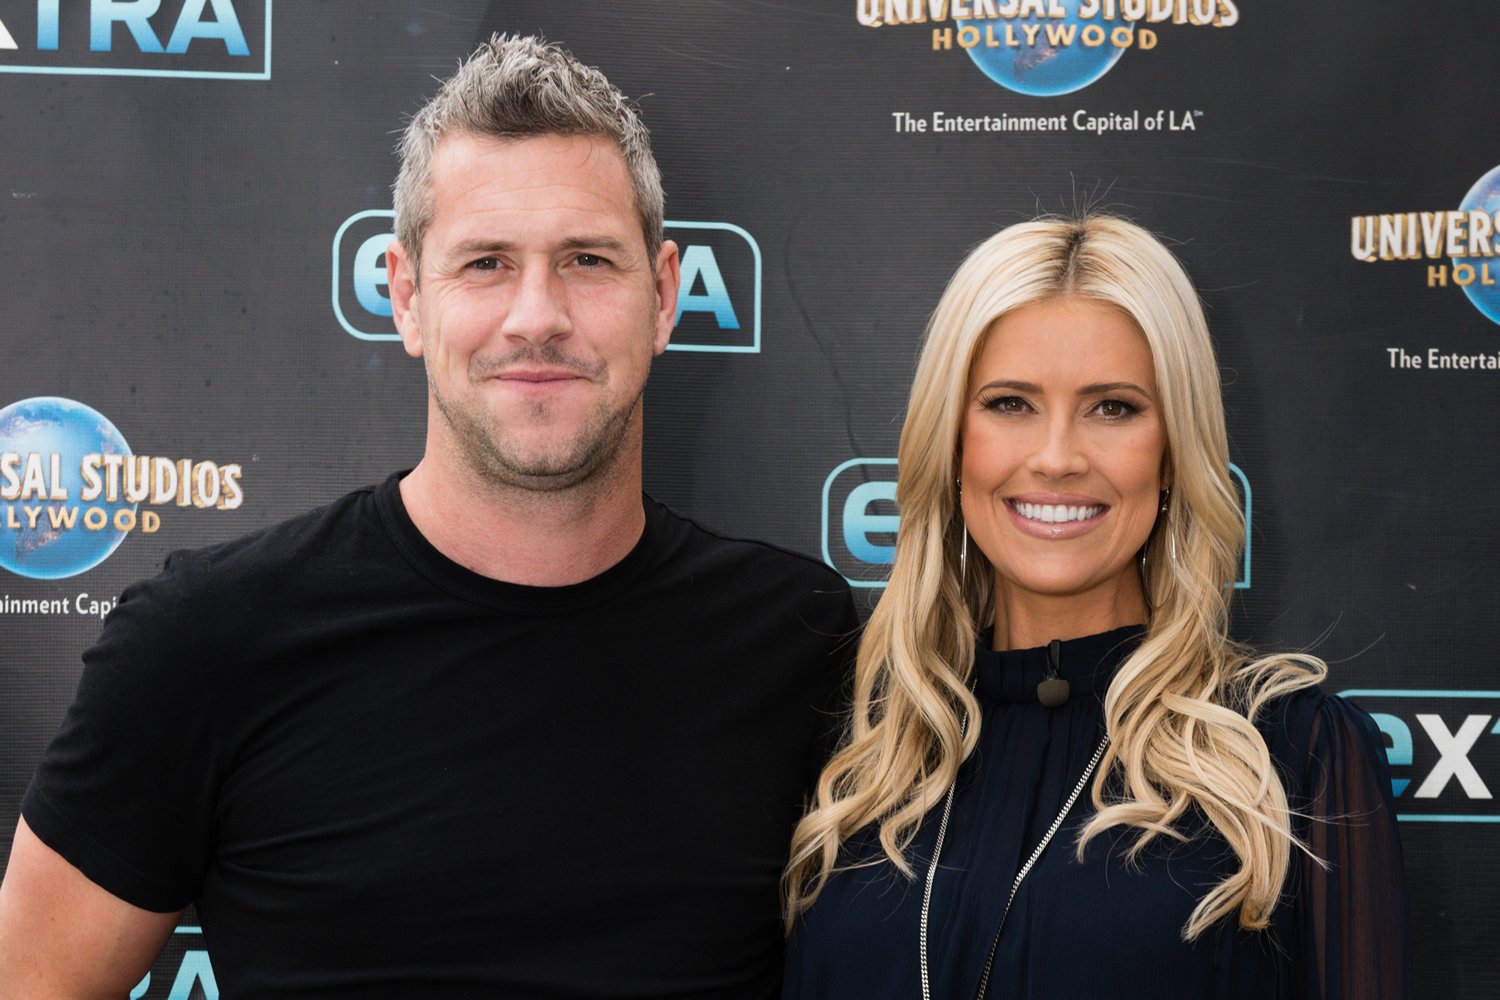 Ant Anstead smiling, poses next to Christina Haack who is smiling wide